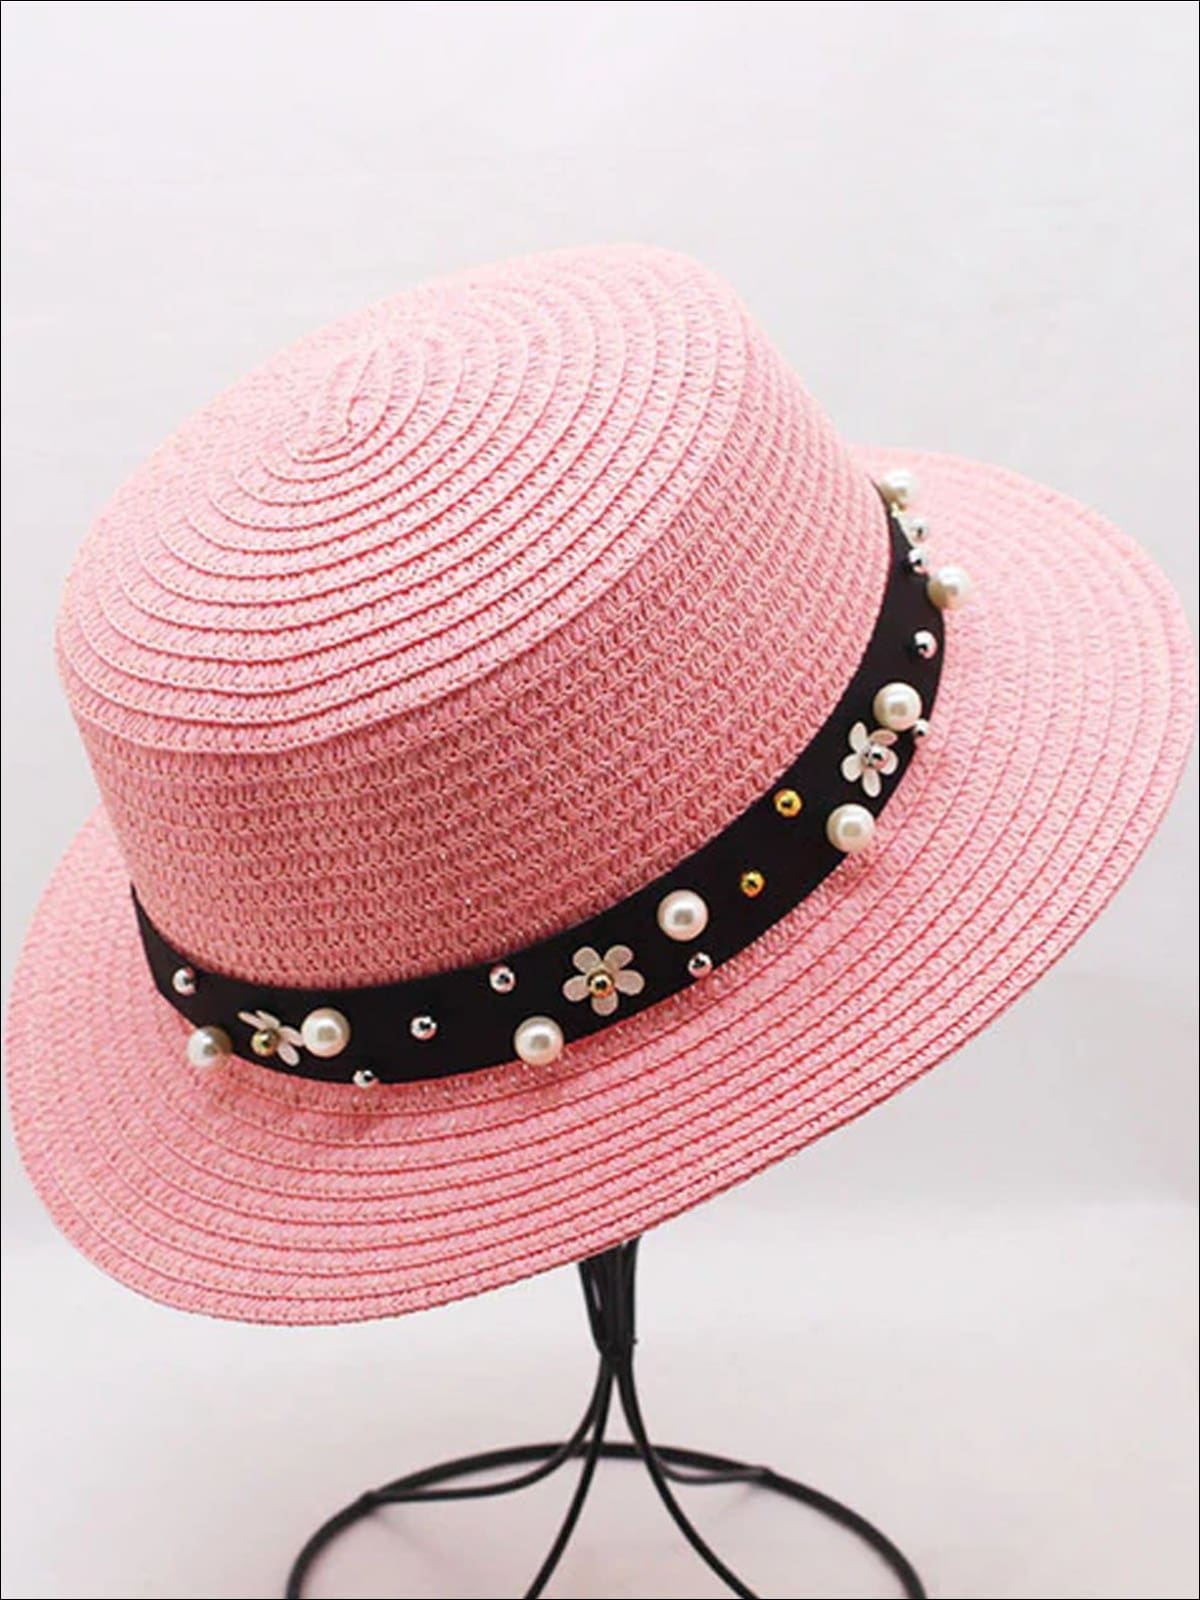 Girls Flower and Pearl Embellished Straw Hat - Peach / One Size - Girls Hats